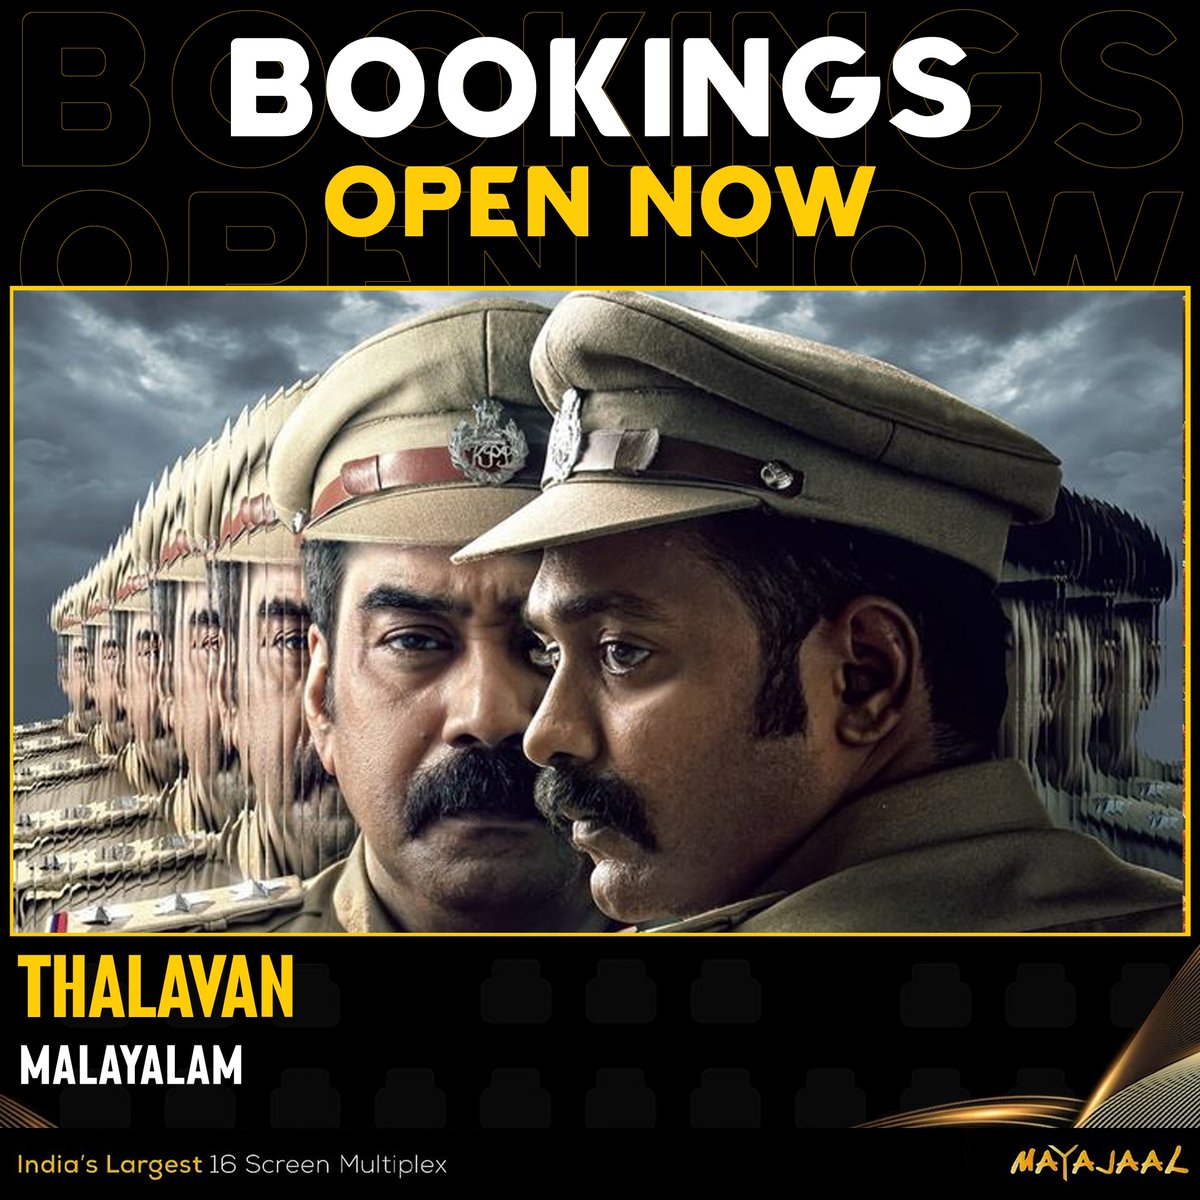 Get ready for a gripping mystery thriller in #Thalavan Bookings open for #Thalavan (Malayalam) at #Mayajaal 🎟️bit.ly/3sVdbqD #AsifAli #BijuMenon